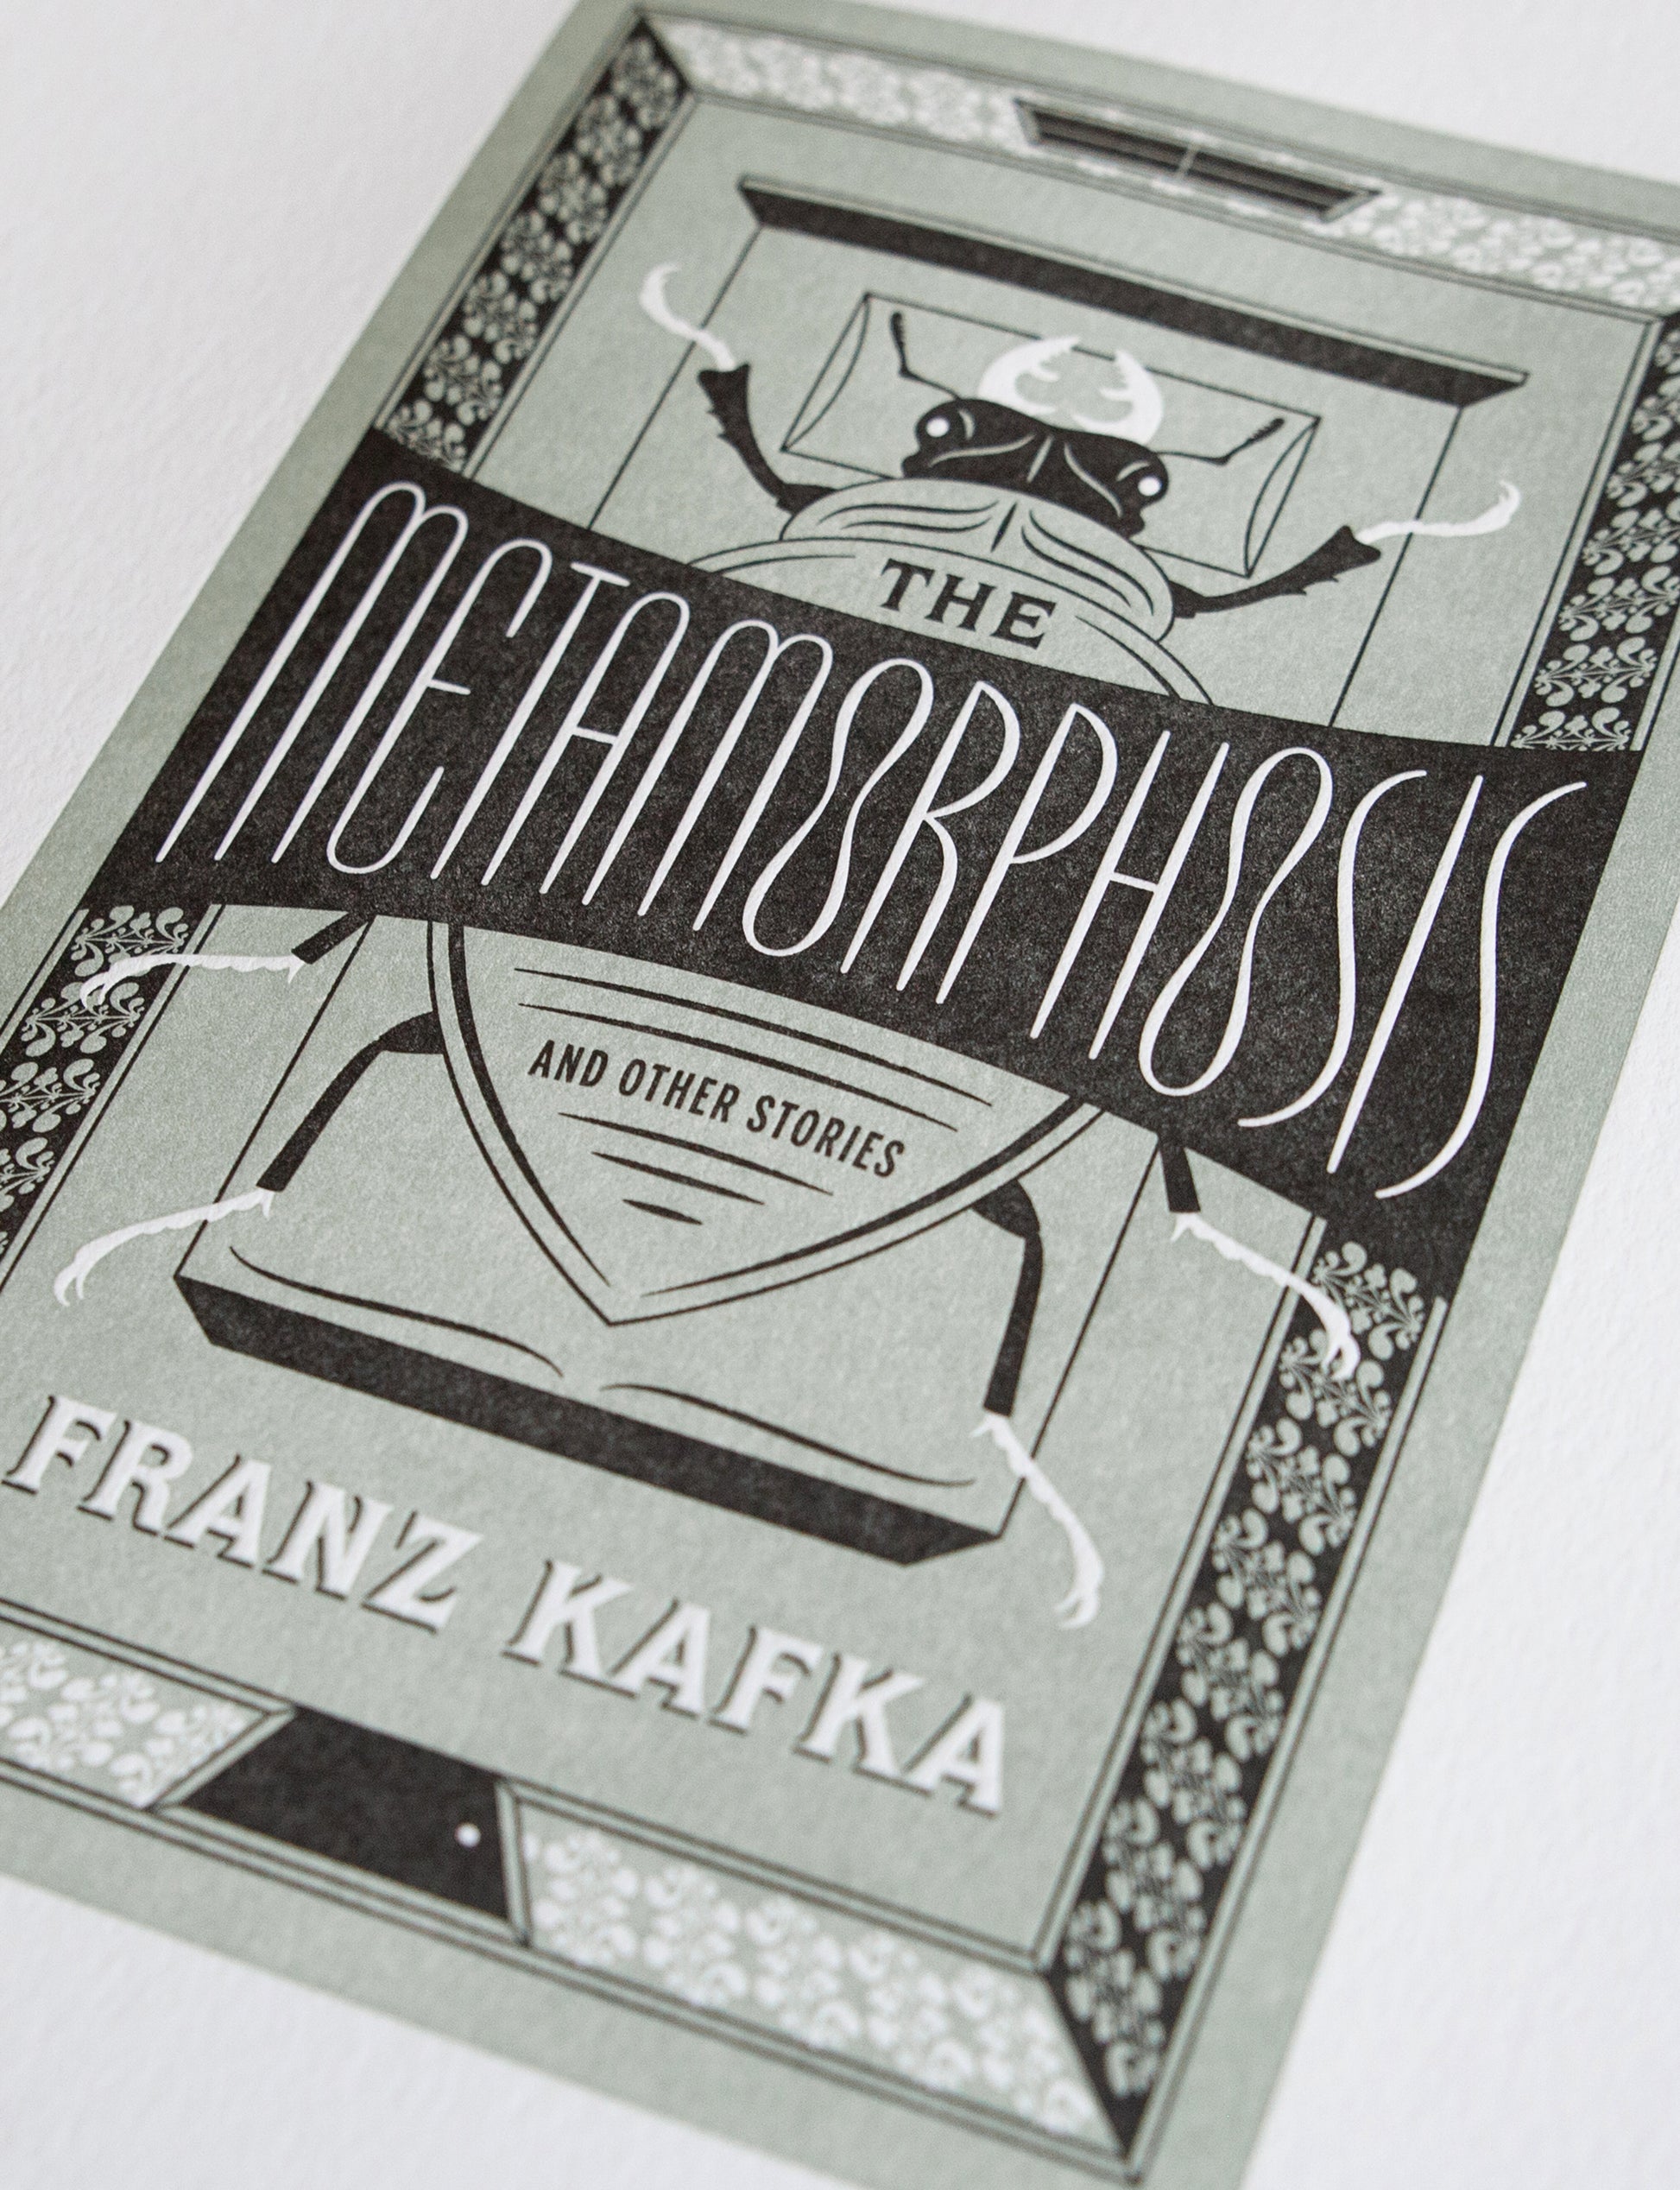 Close-up of a 2-color letterpress print in green and black. Printed artwork is an illustrated book cover of The Metamorphosis including custom hand lettering.